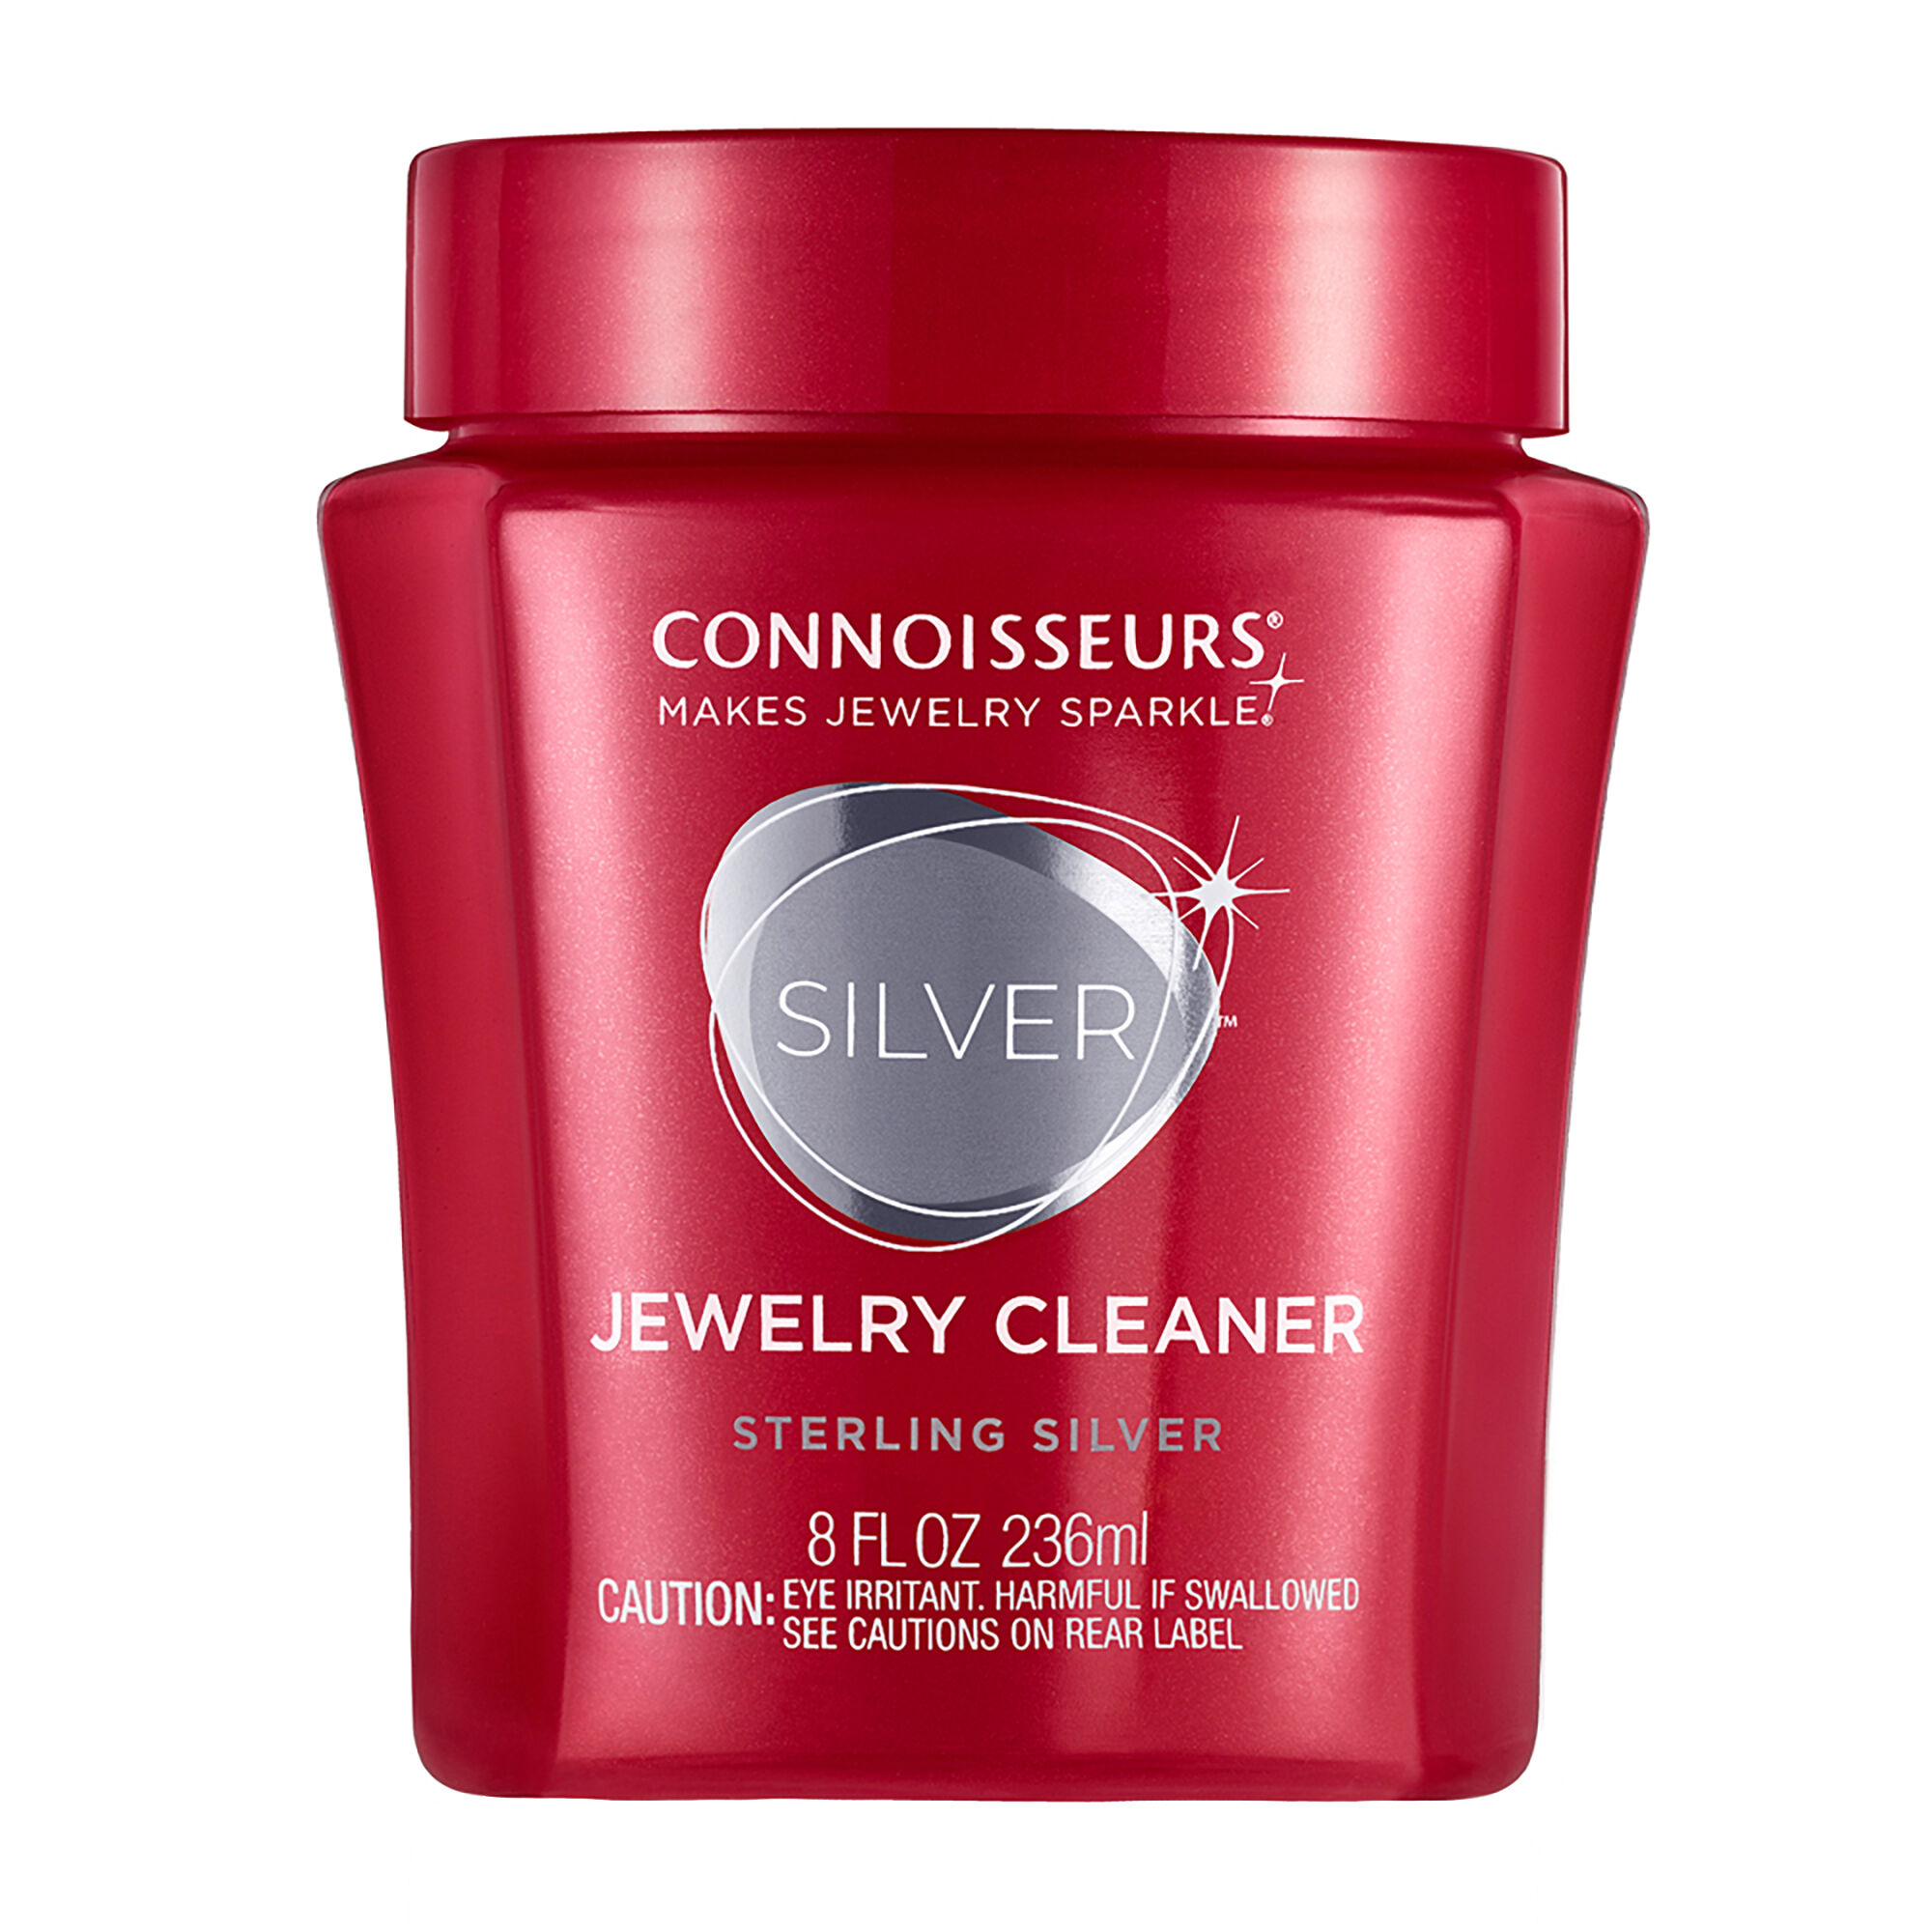 Silver Jewelry Cleaner - Lila Clare